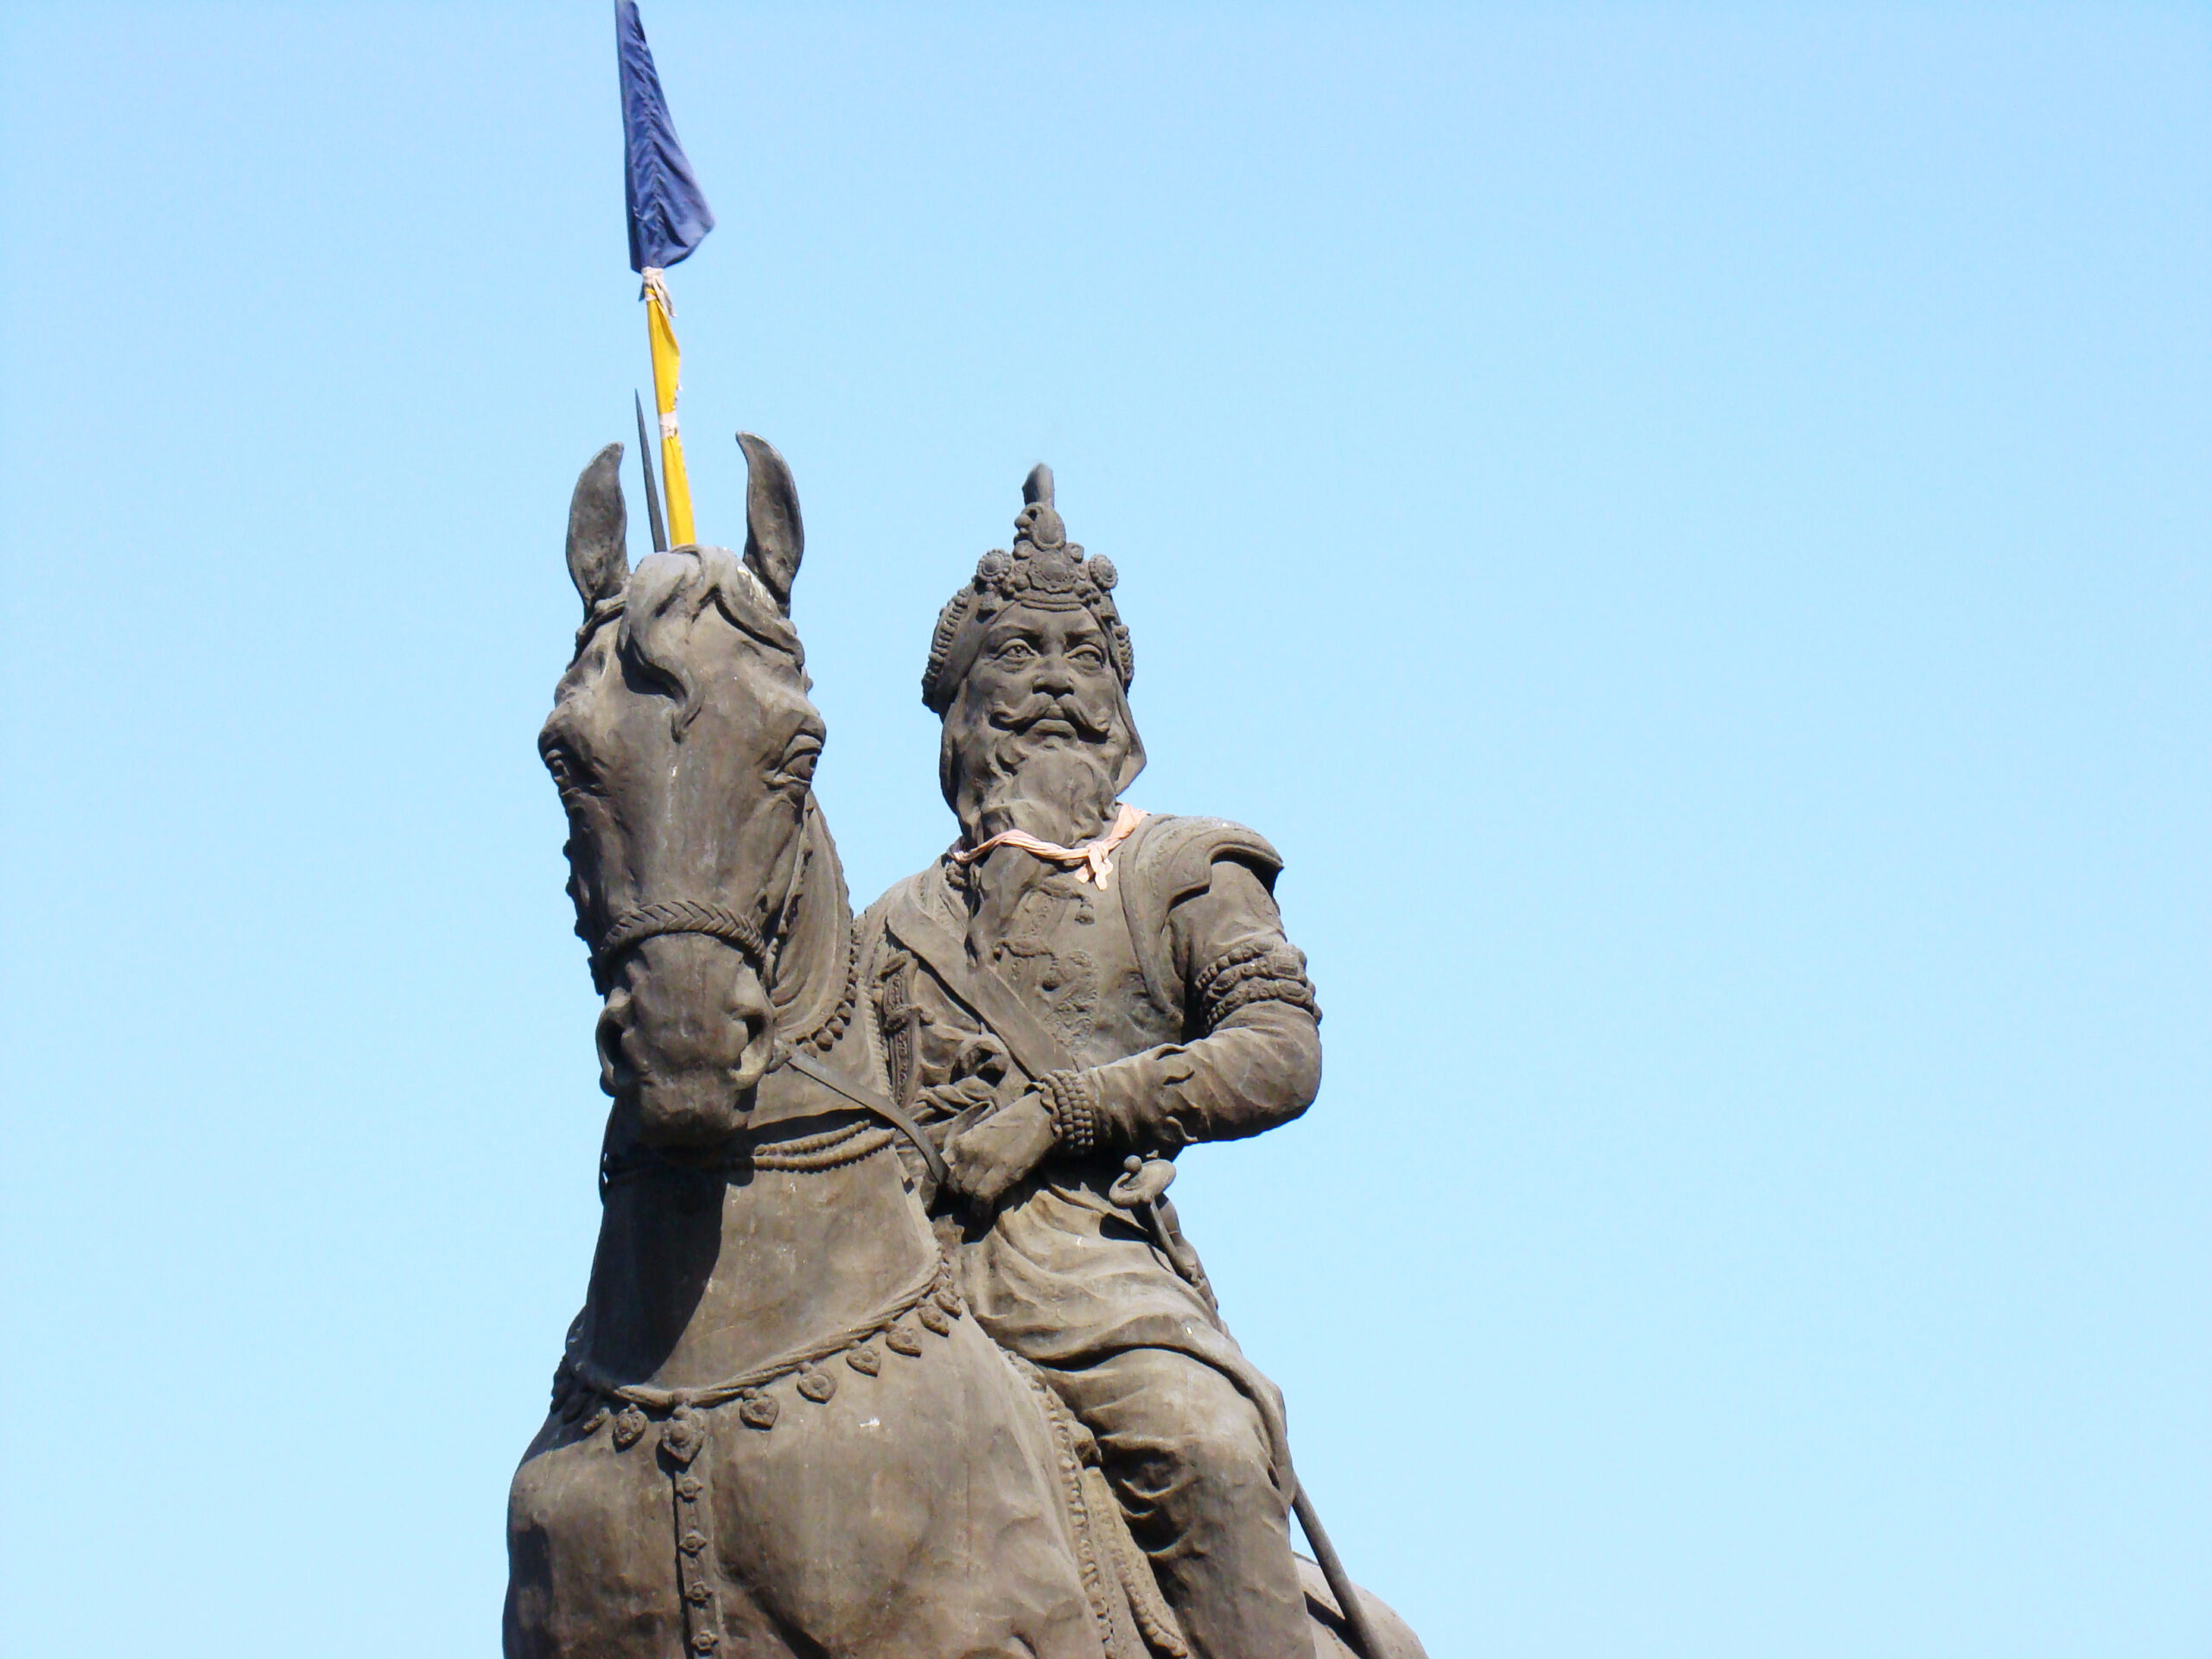 On This Day 12 April, Maharaja Ranjit Singh, statue, Amritsar, Ram Bagh, historical figure, Sikh Empire, Punjab, horse statue, outdoor sculpture, Indian history, cultural heritage, On This Day 12 April, History today May 6